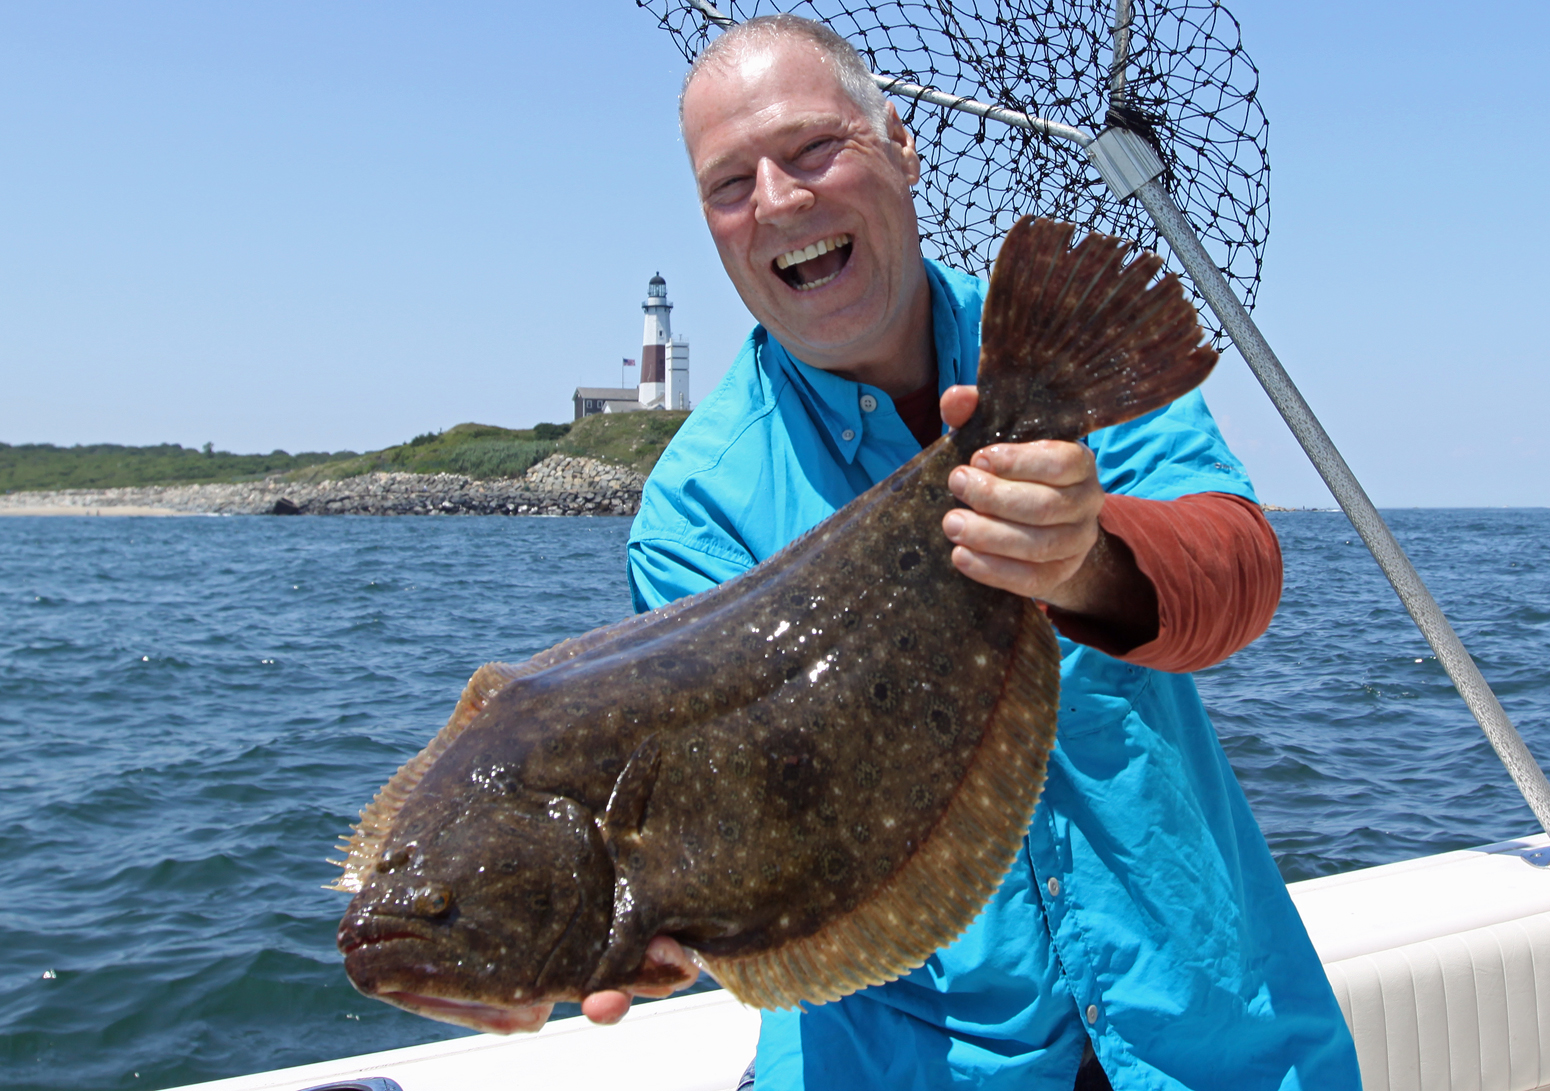 Fluke tips and where to find them